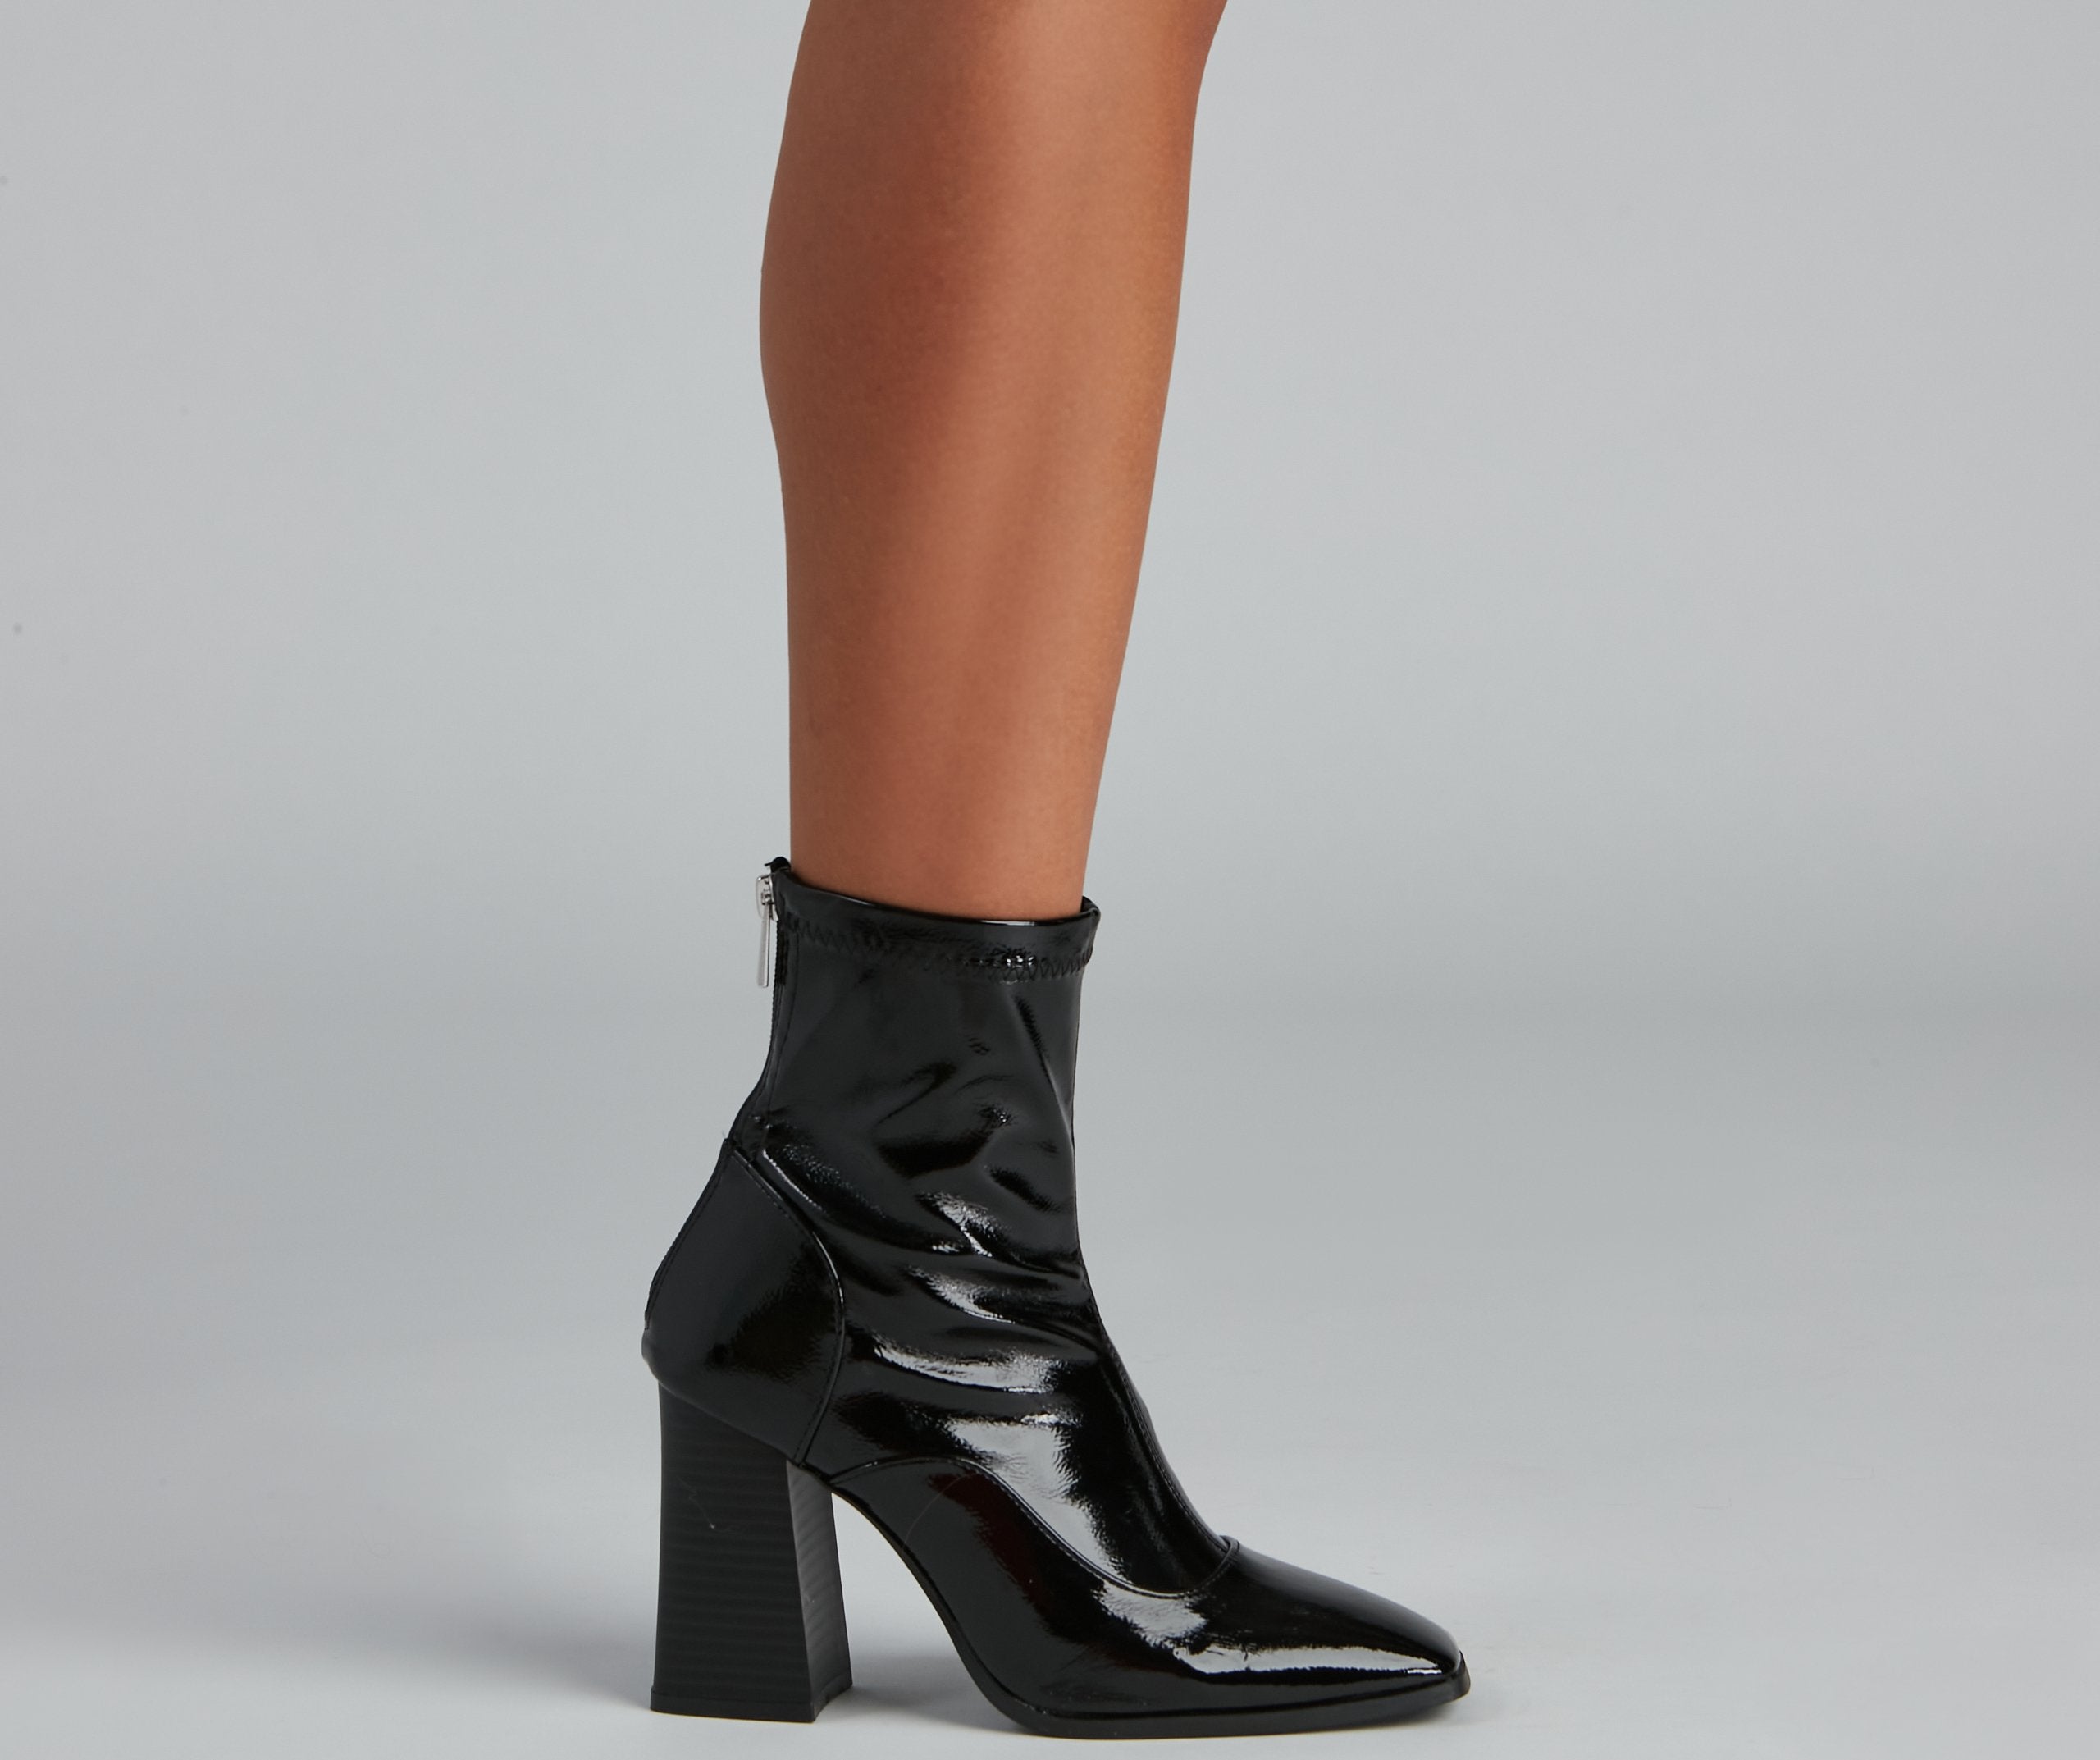 Edgy Chick Patent Leather Booties - Lady Occasions